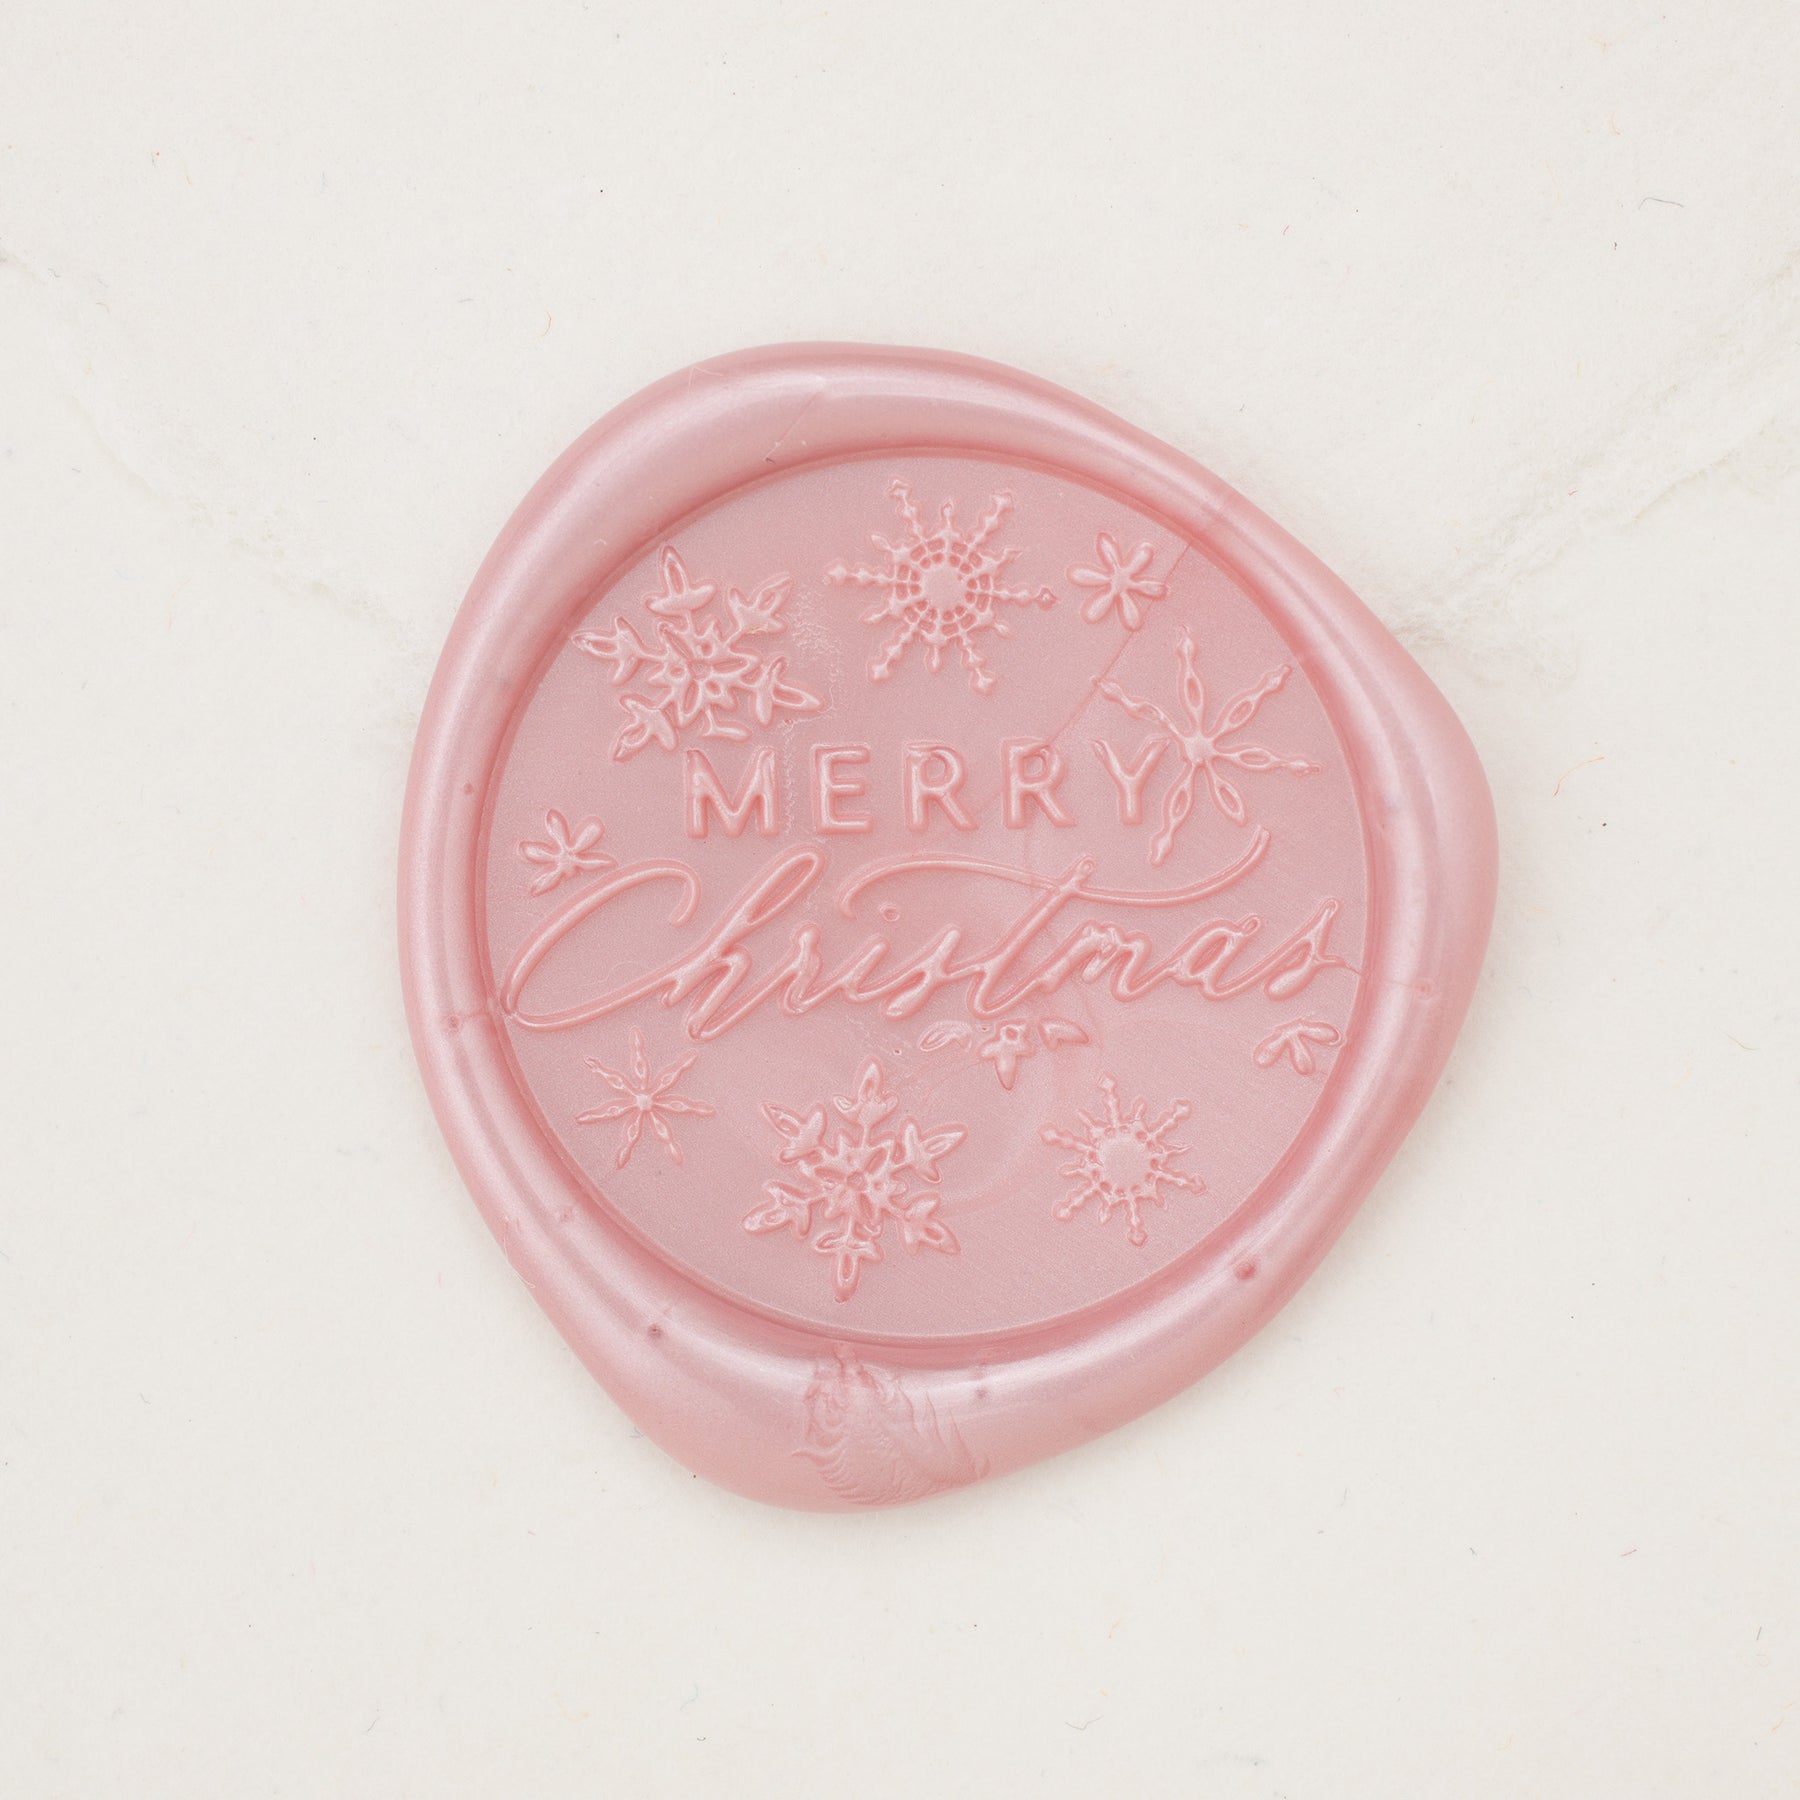 Elegant Christmas Floral Wax seal | Set of 6 Marketplace Holiday Wax Seals  by undefined